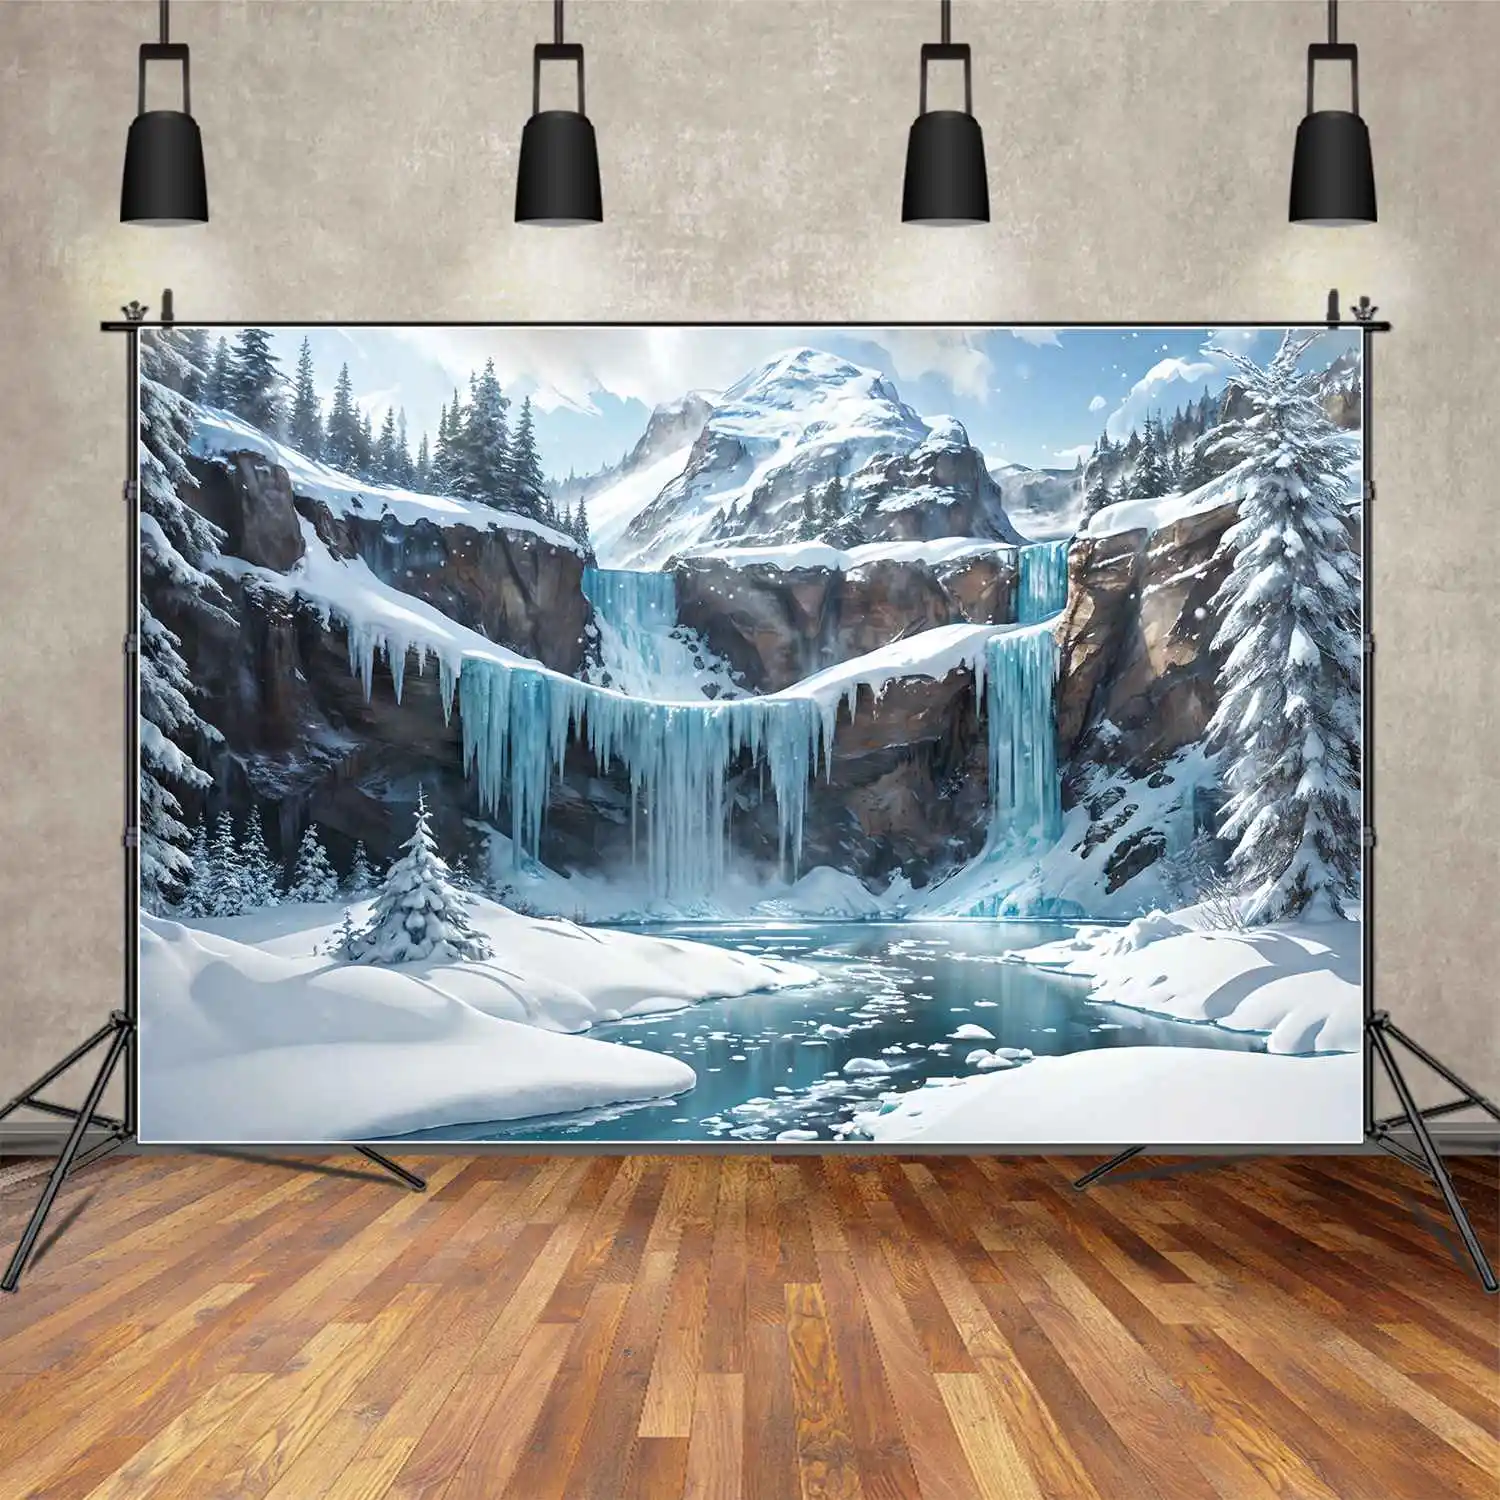 

Winter Frozen Waterfall Backdrops Photography Decorations Bluey Snow Mountains Custom Baby Photobooth Photographic Backgrounds